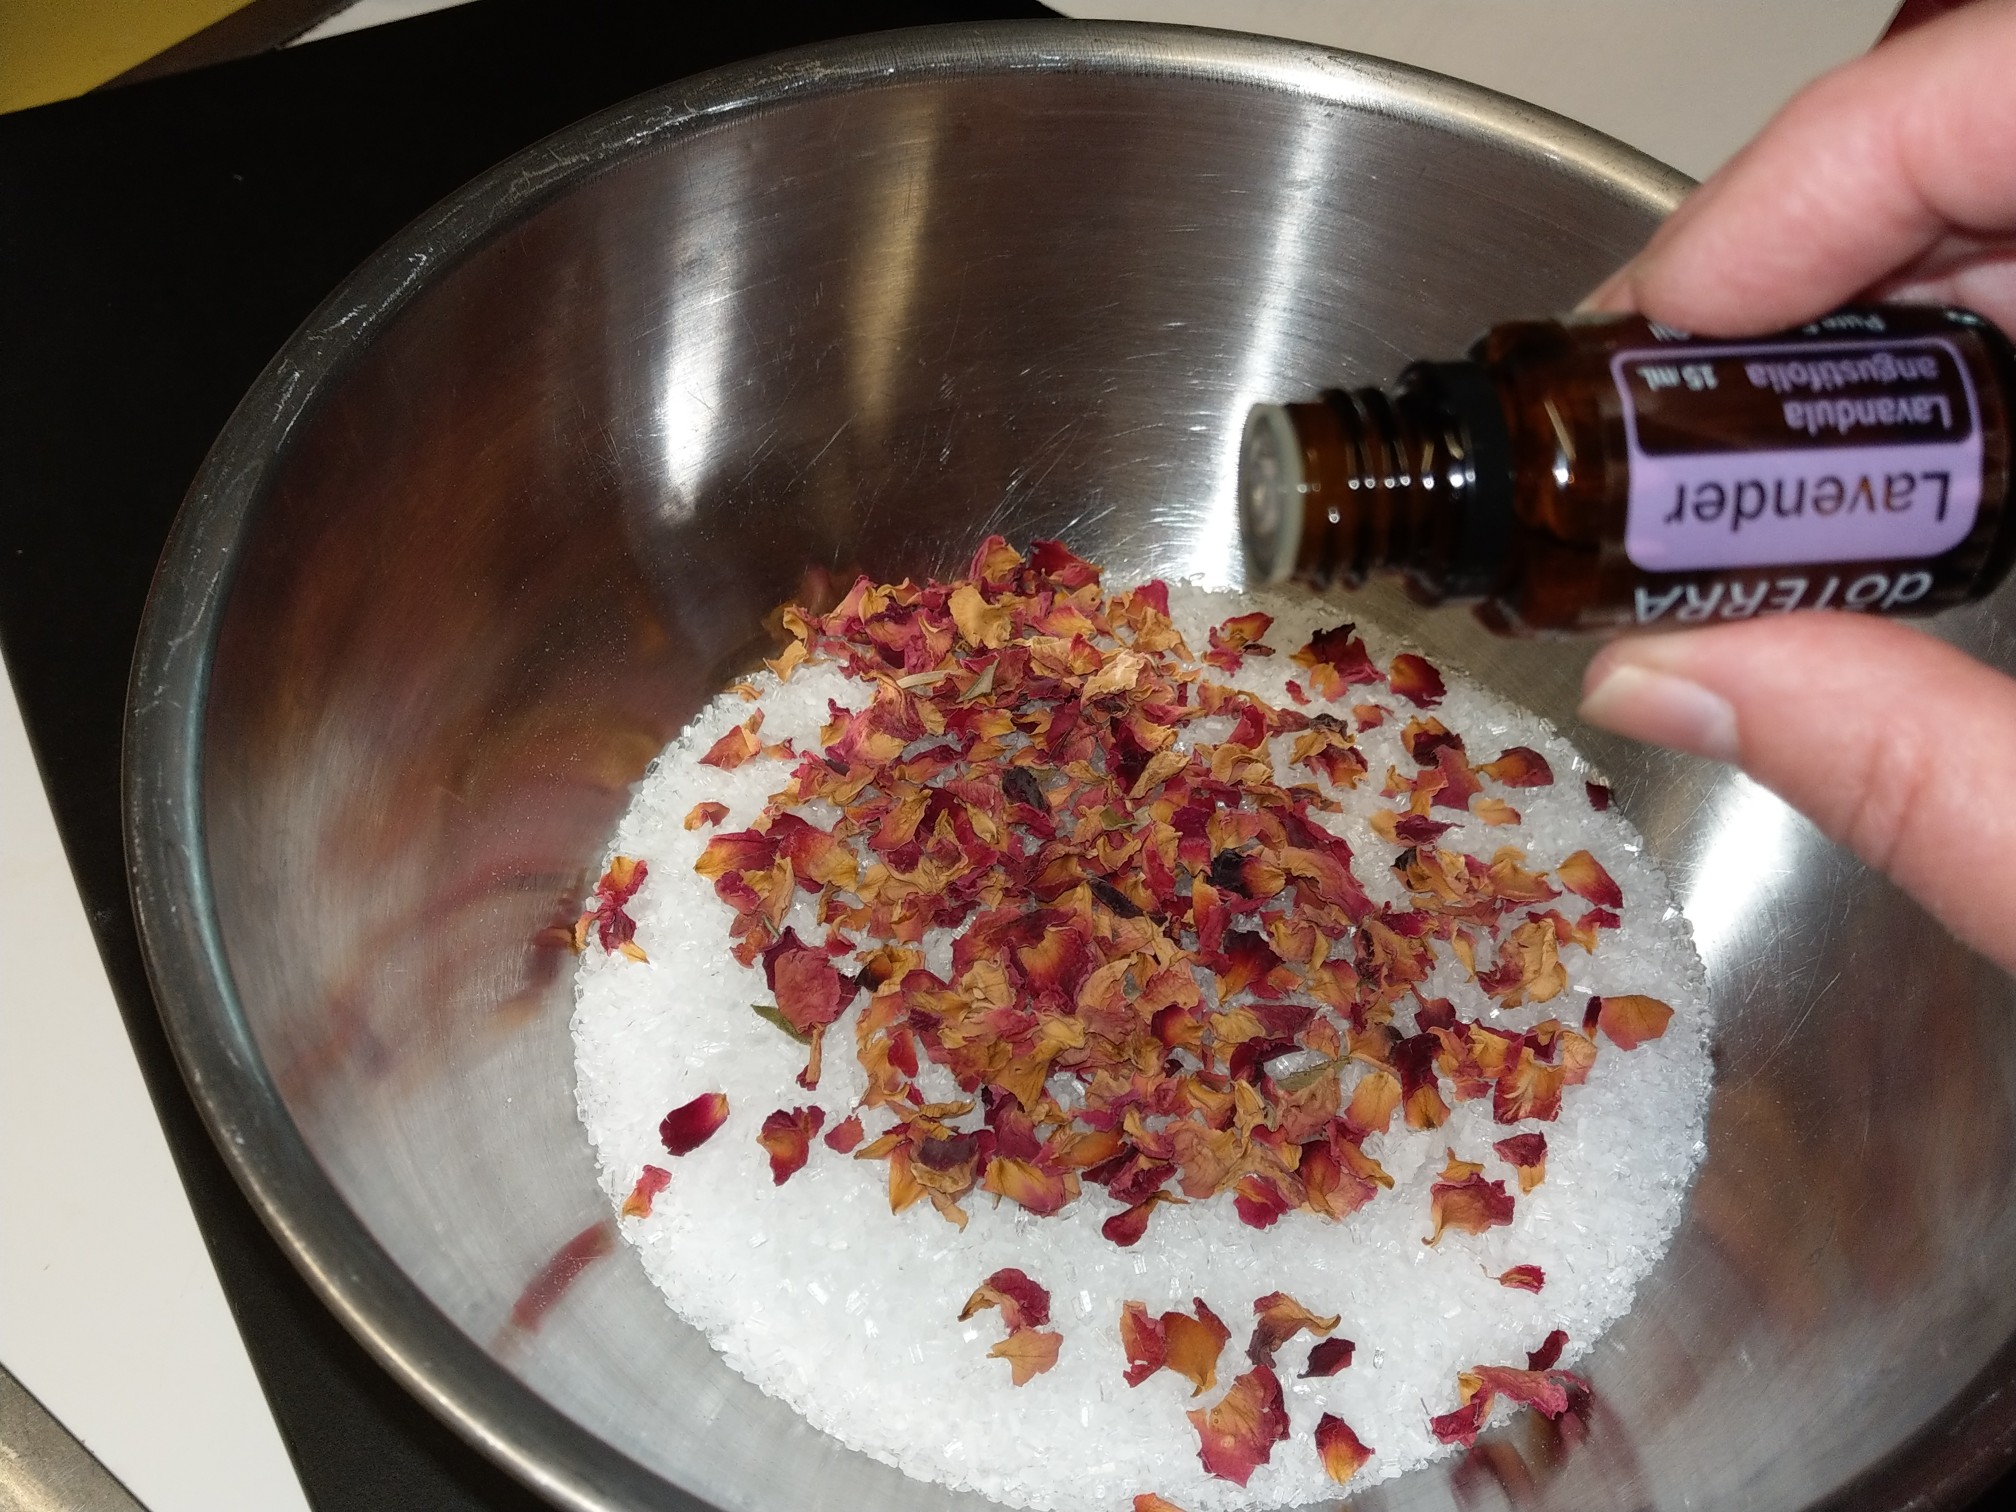 Homemade Christmas Gifts: Scented Bath Salts 2